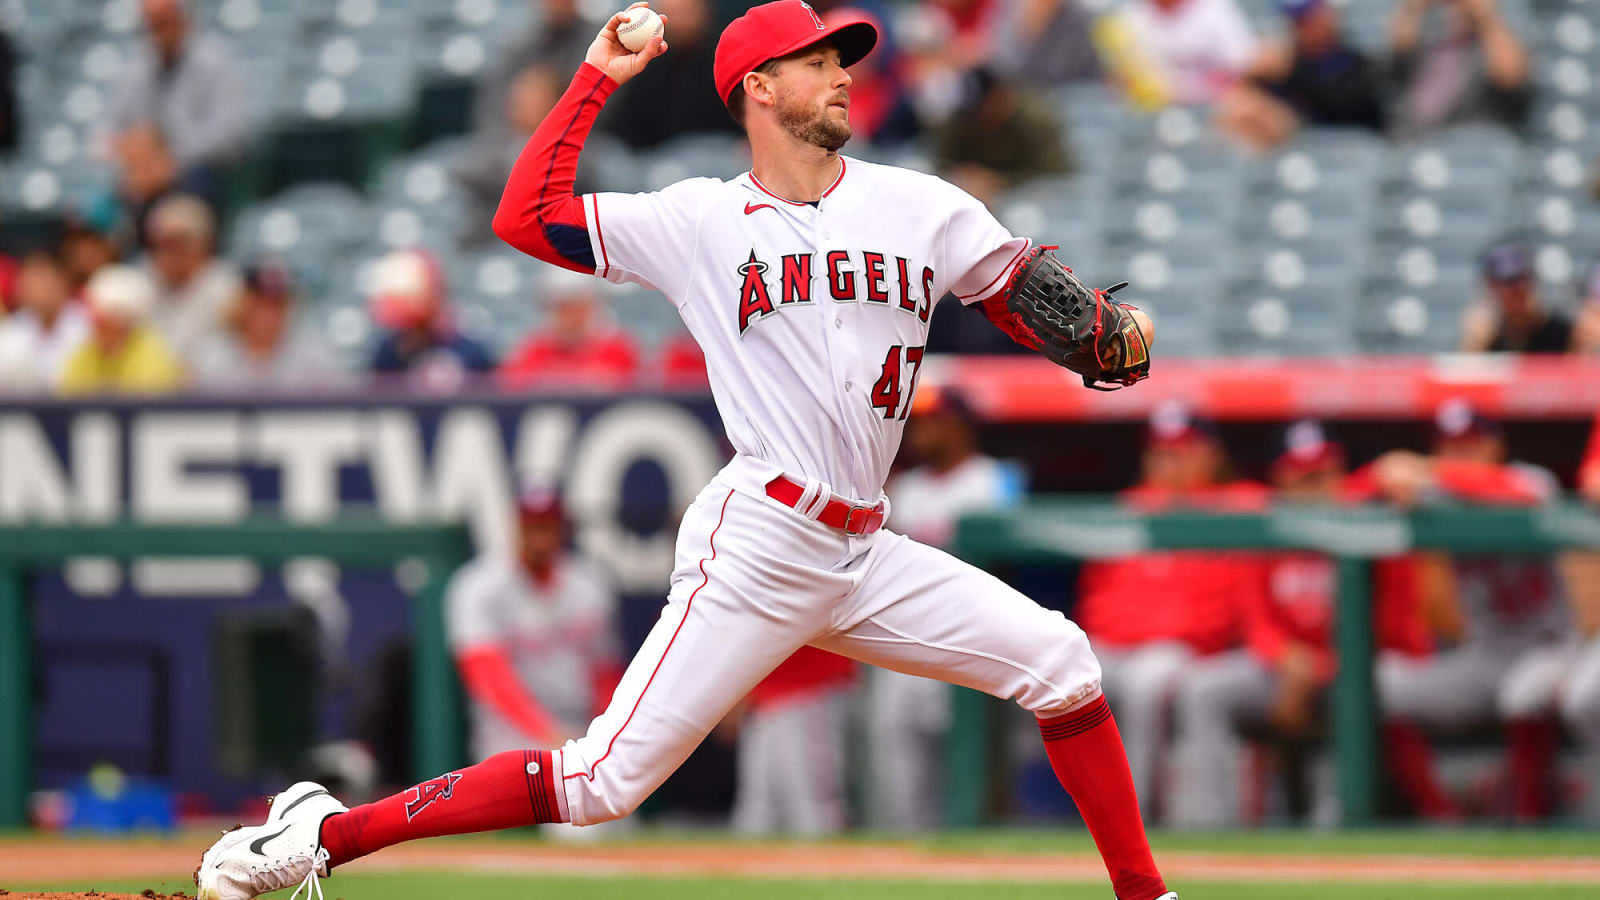 Griffin Canning Altered Training Regimen To Aid Return to Angels